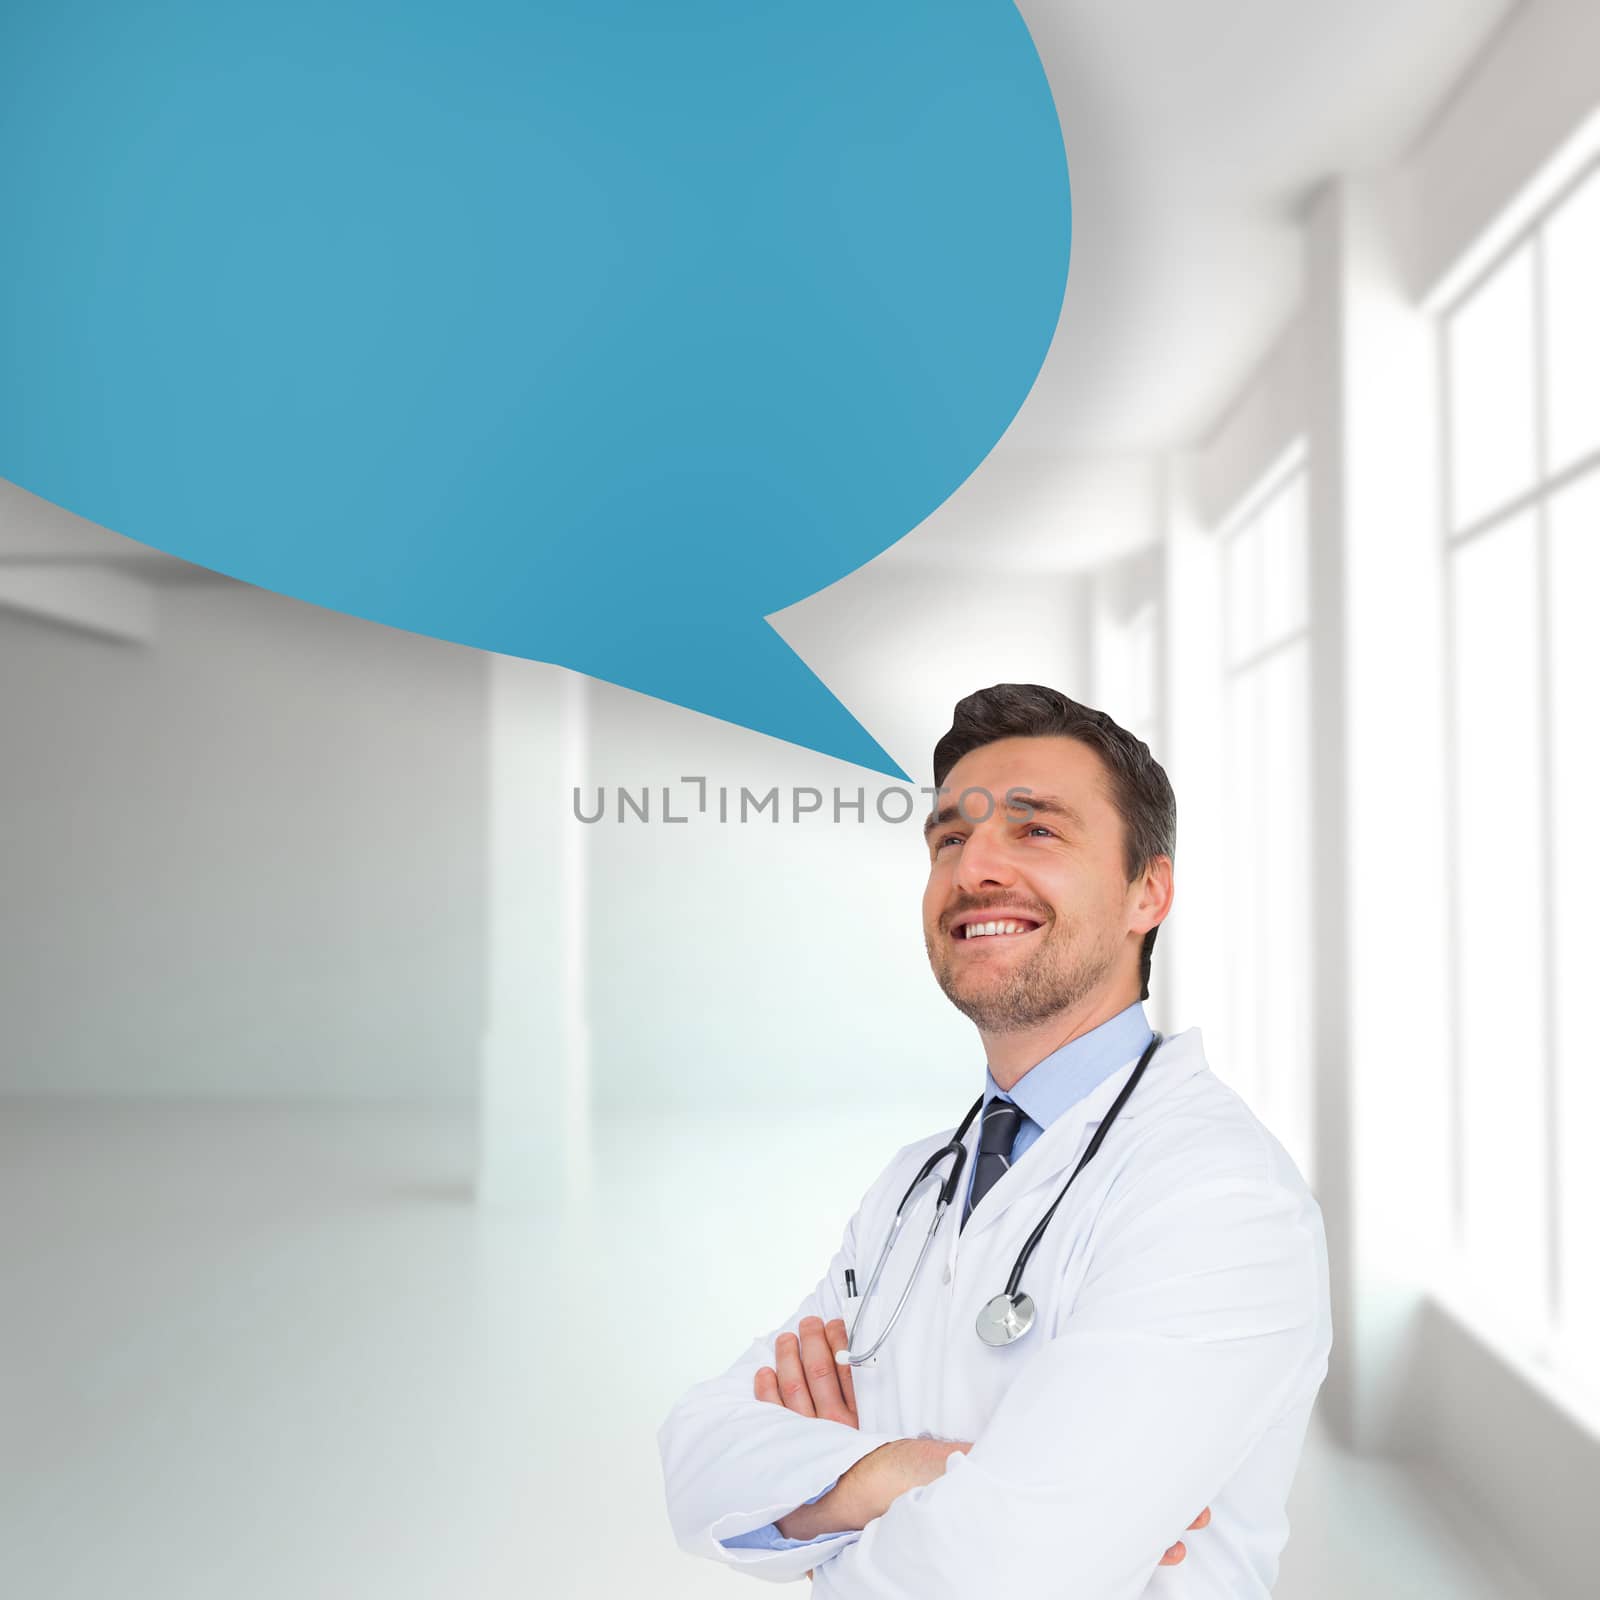 Handsome young doctor with arms crossed with speech bubble against white room with windows